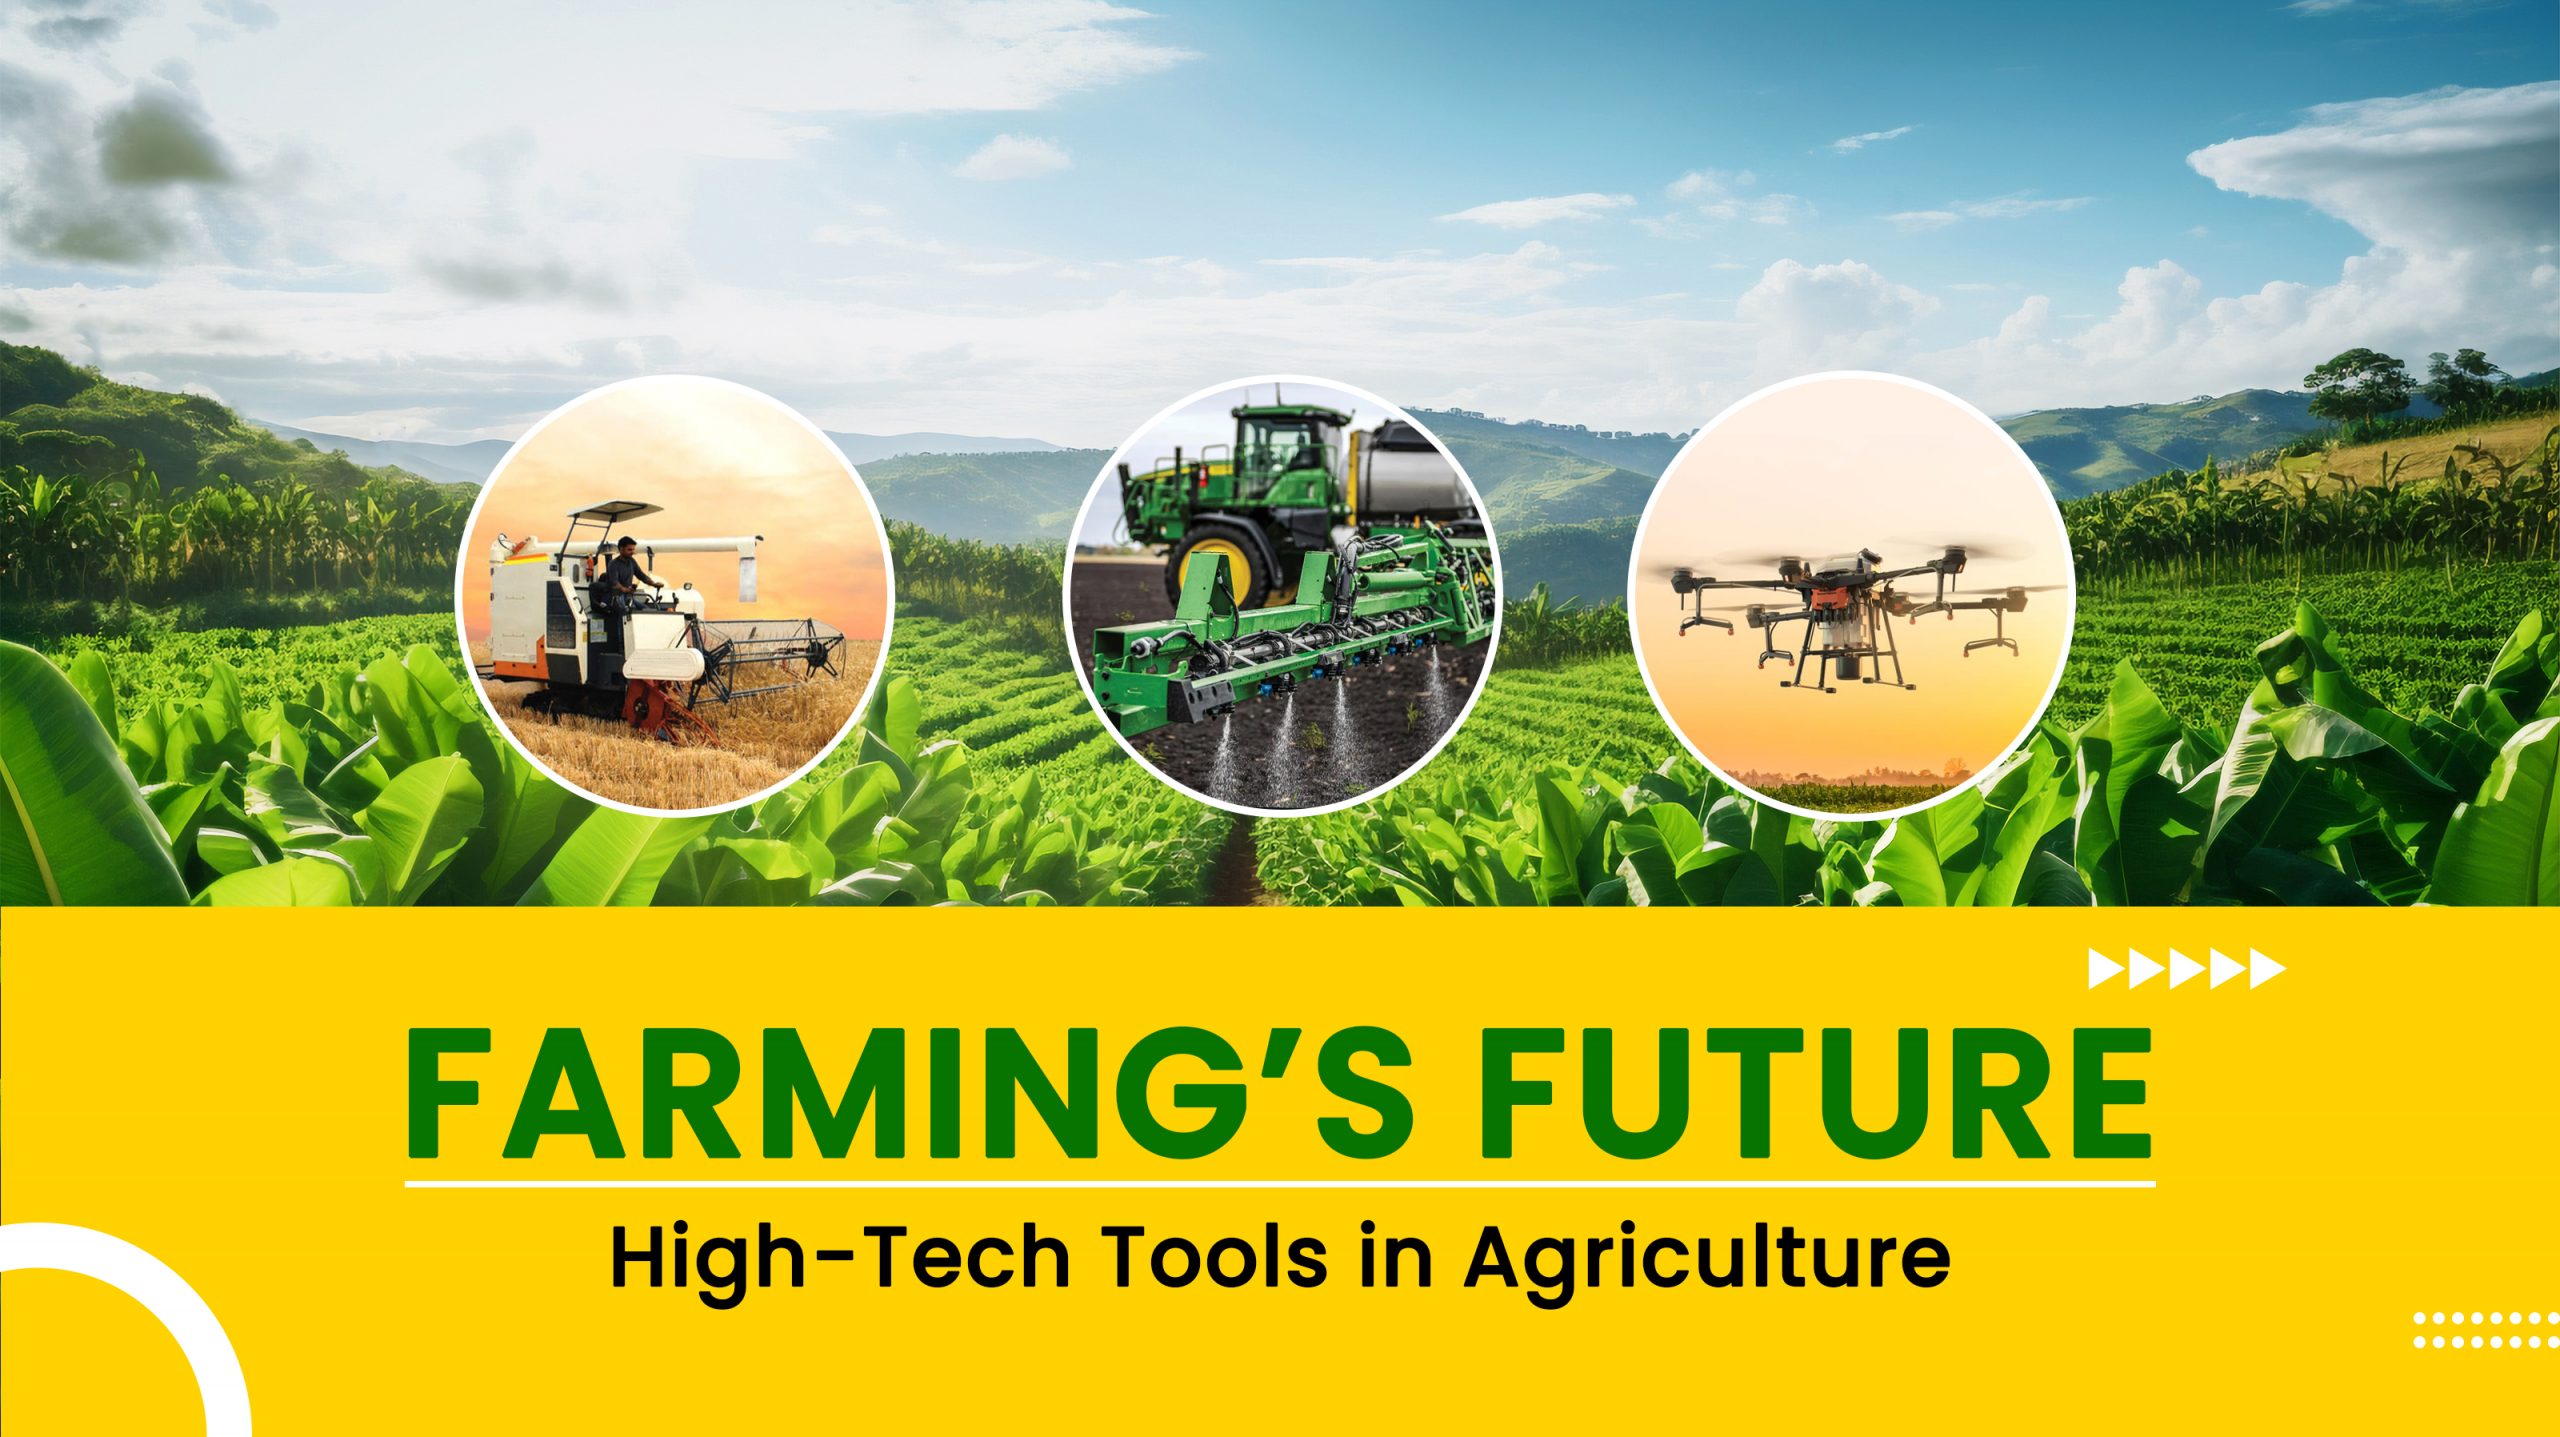 Farming's Future: High-Tech Tools in Agriculture